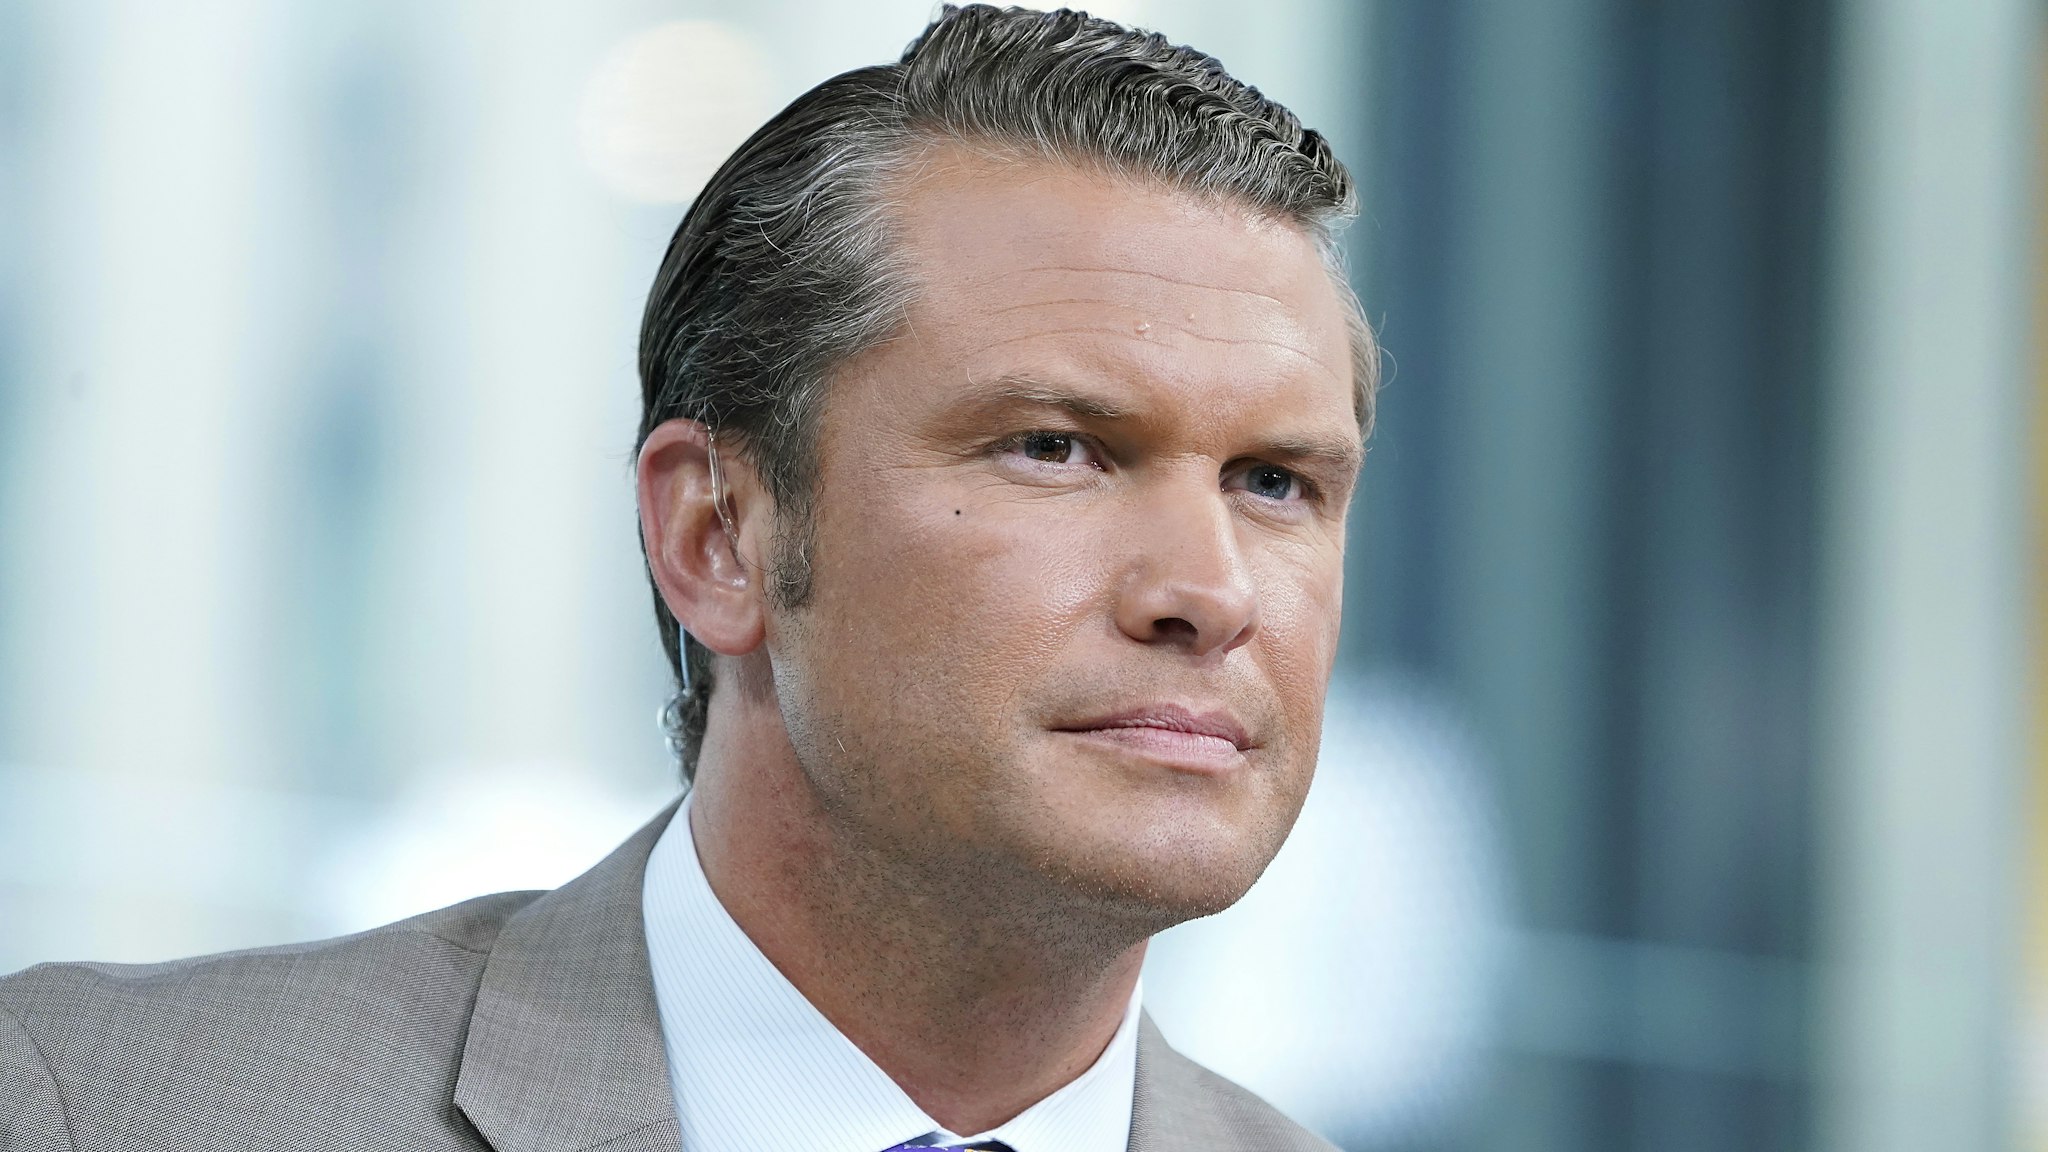 Fox anchor Pete Hegseth interviews entrepreneur and venture capitalist Peter Thiel during "FOX &amp; Friends" at Fox News Channel Studios on August 09, 2019 in New York City.